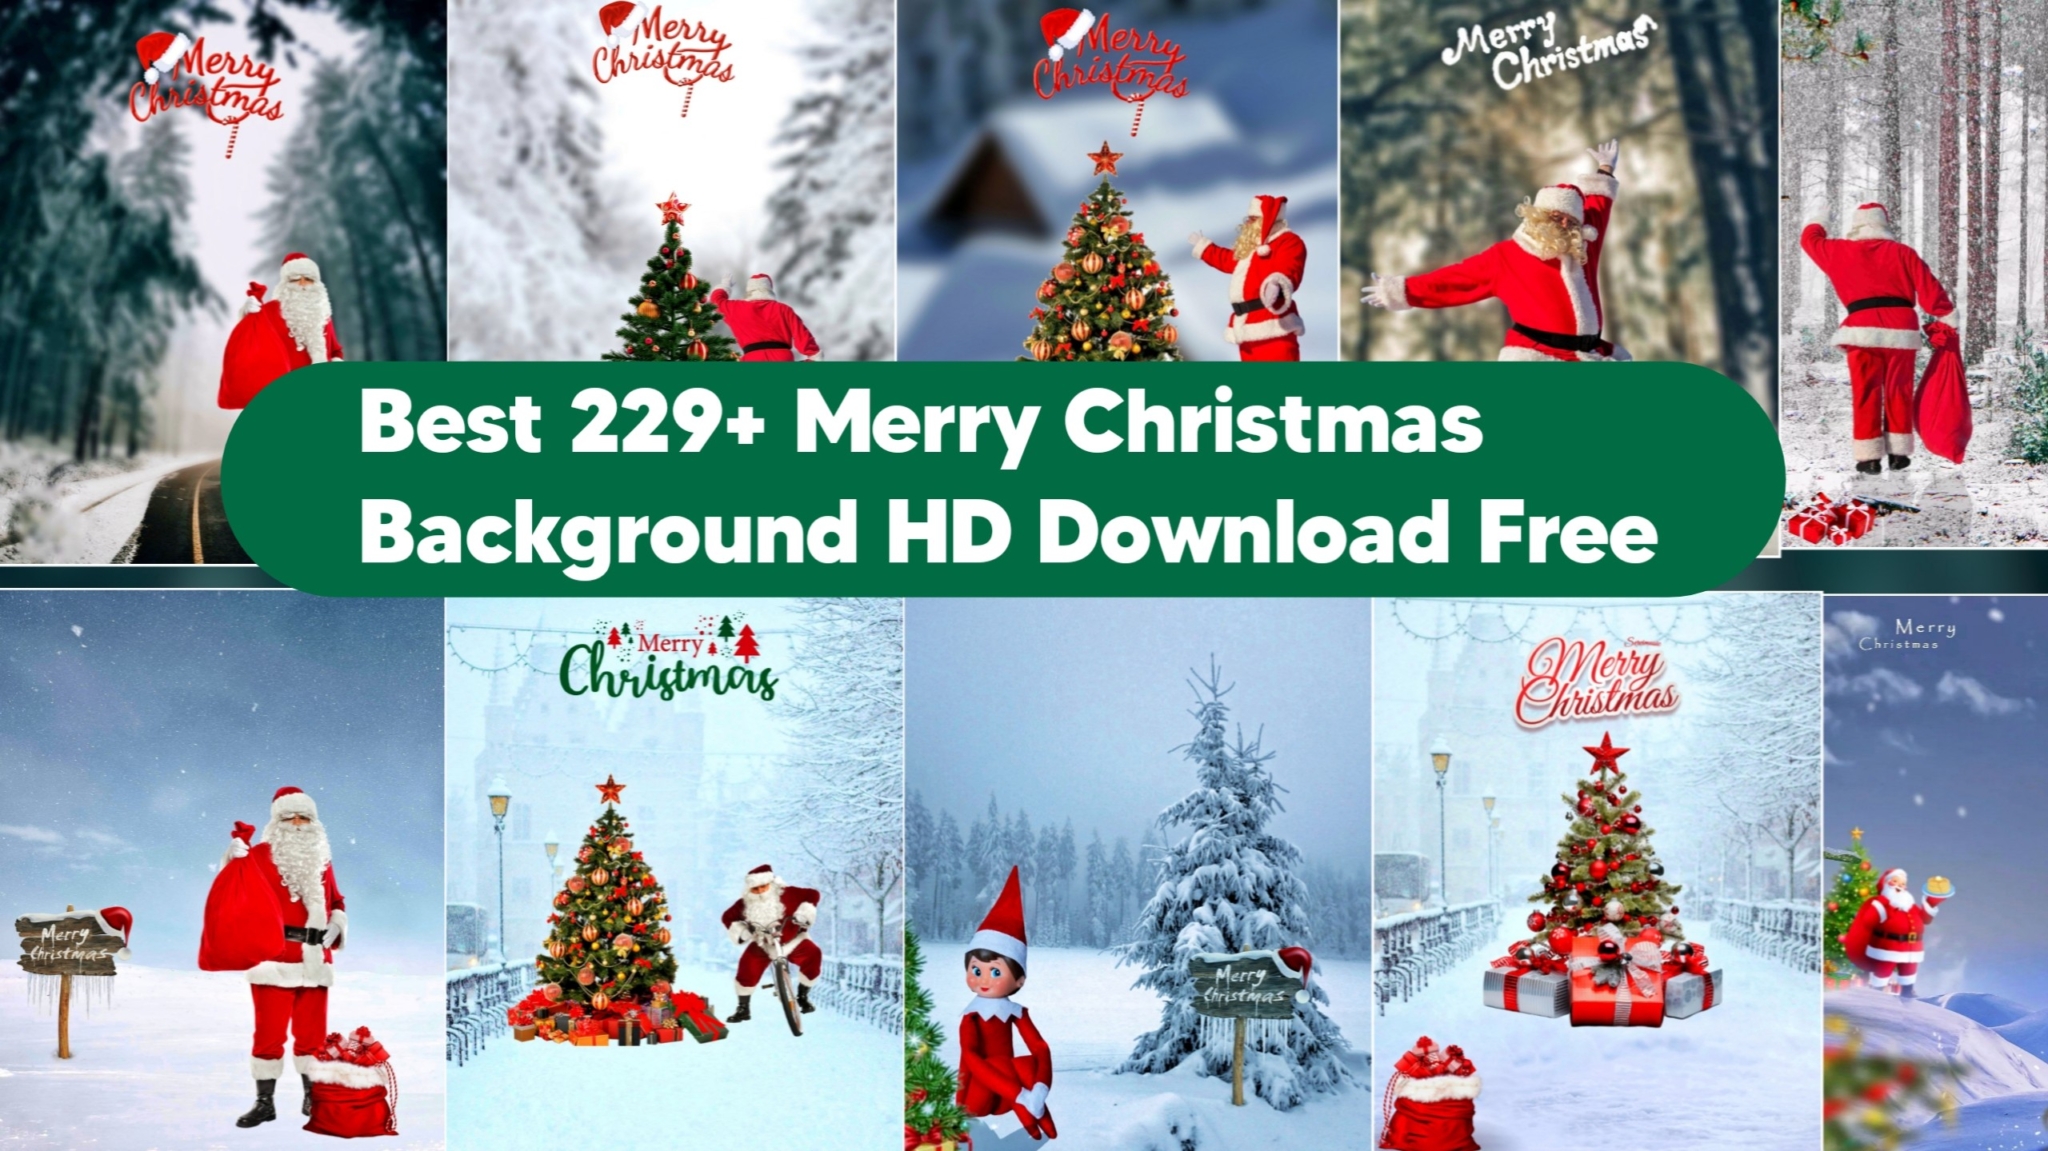 Best 229+ Merry Christmas Background HD Download Free